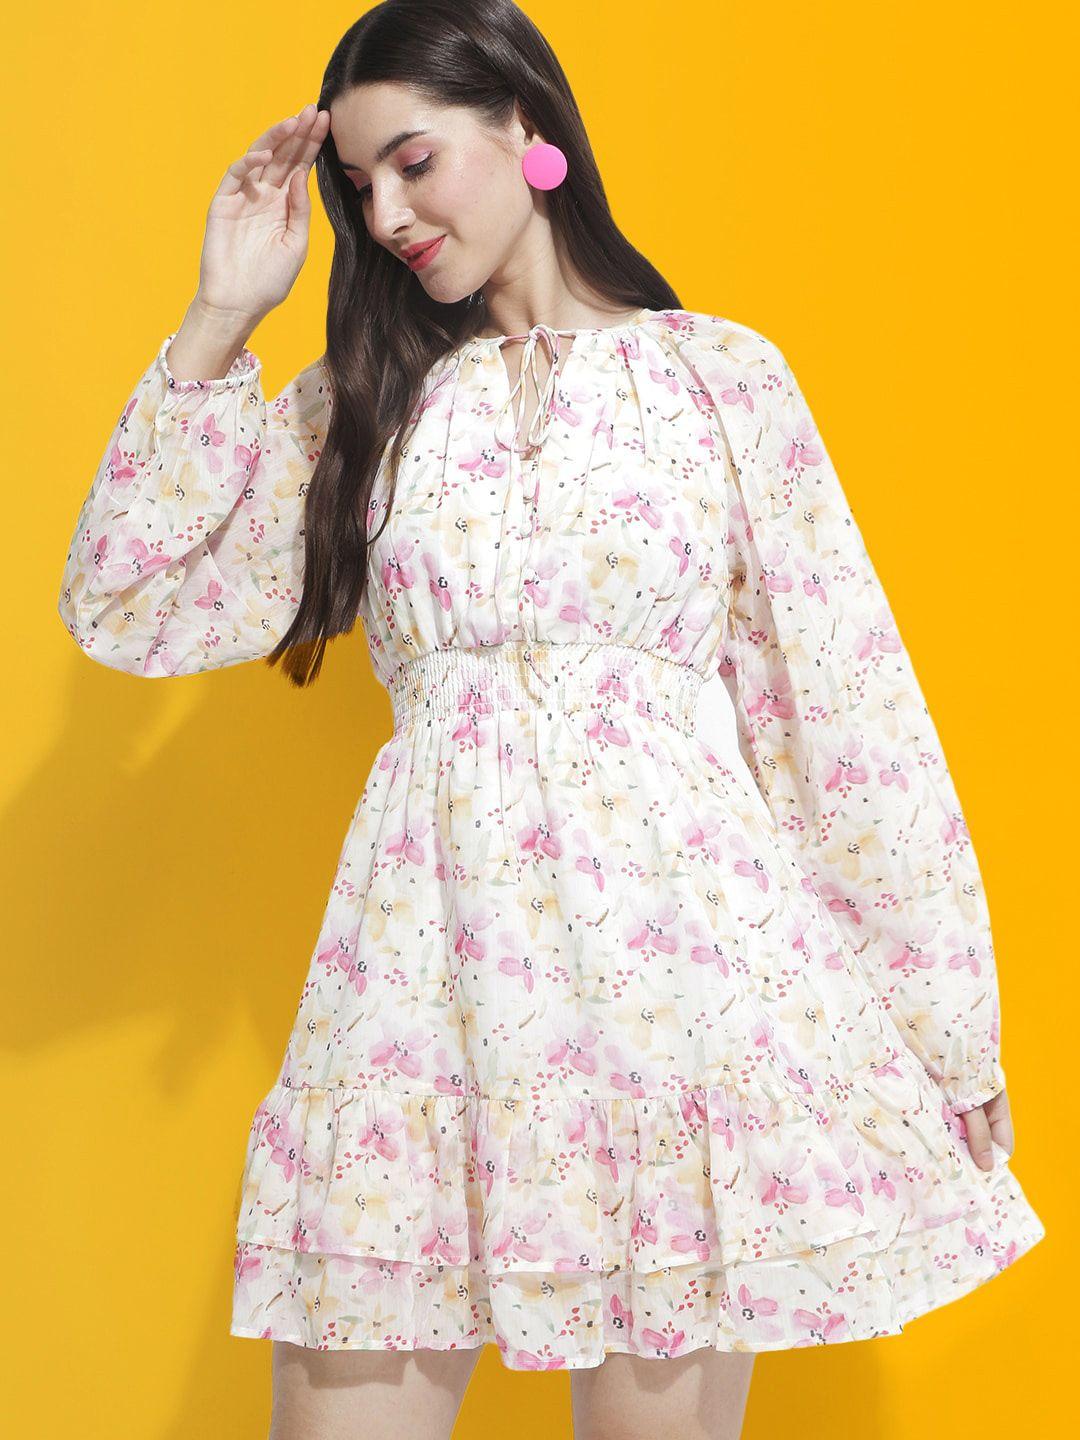 mast & harbour white floral printed tie-up neck smocked puffed sleeves fit & flare dress